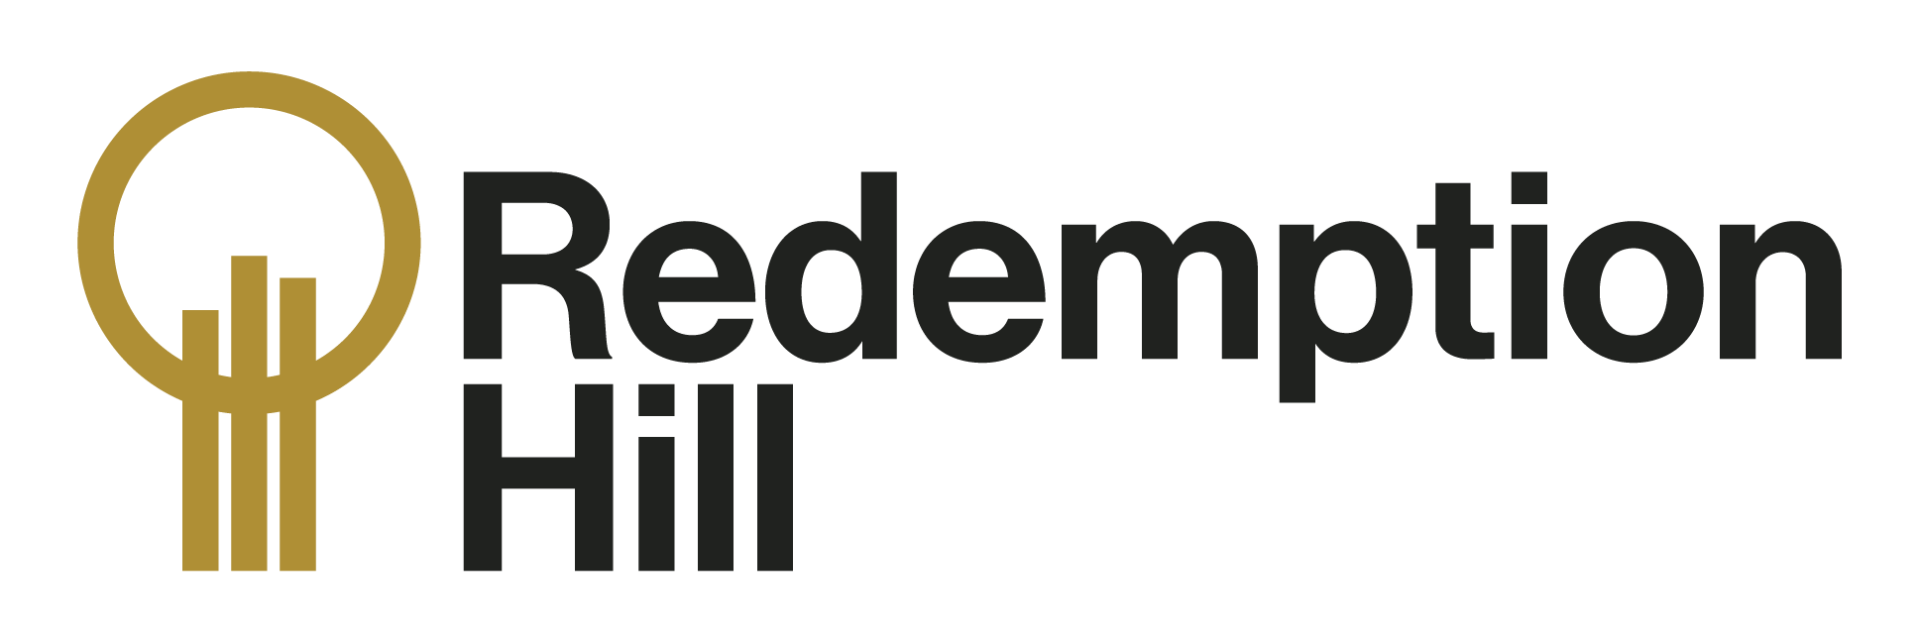 A logo for a company called redemption hill